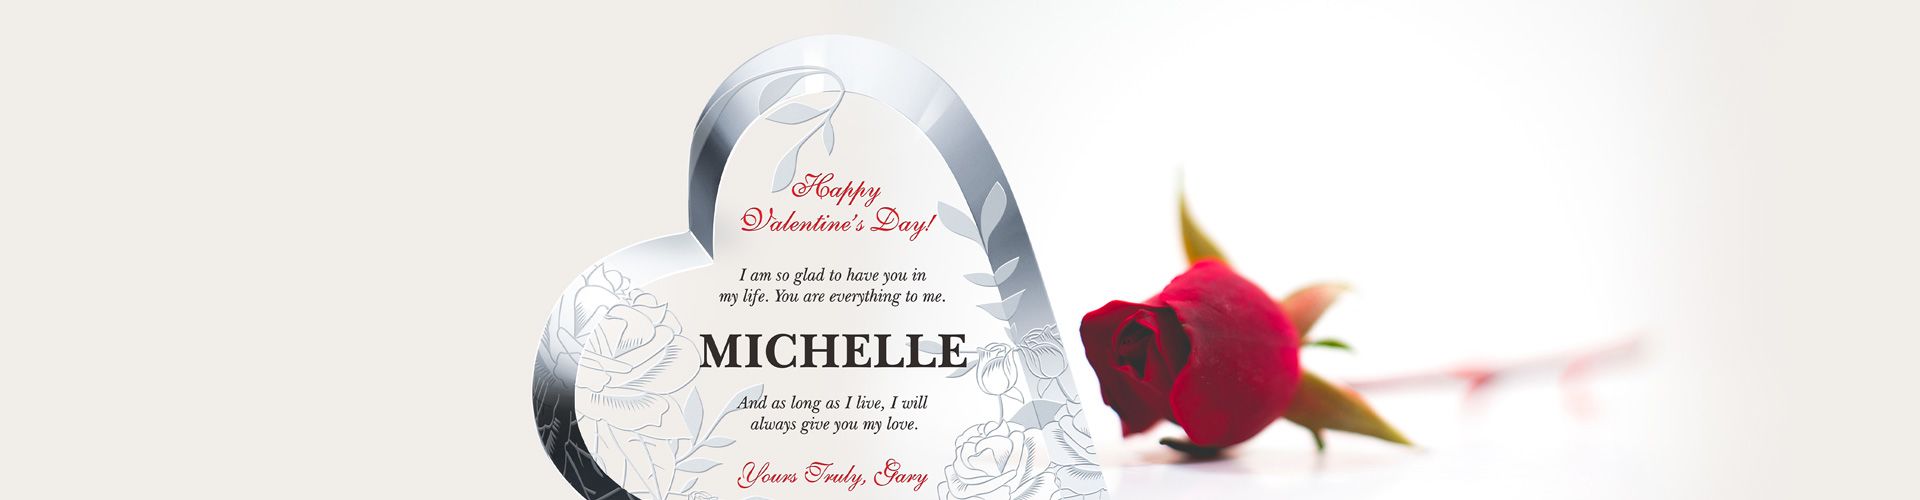 Engraved Crystal Valentine's Day Gifts - Banner 1